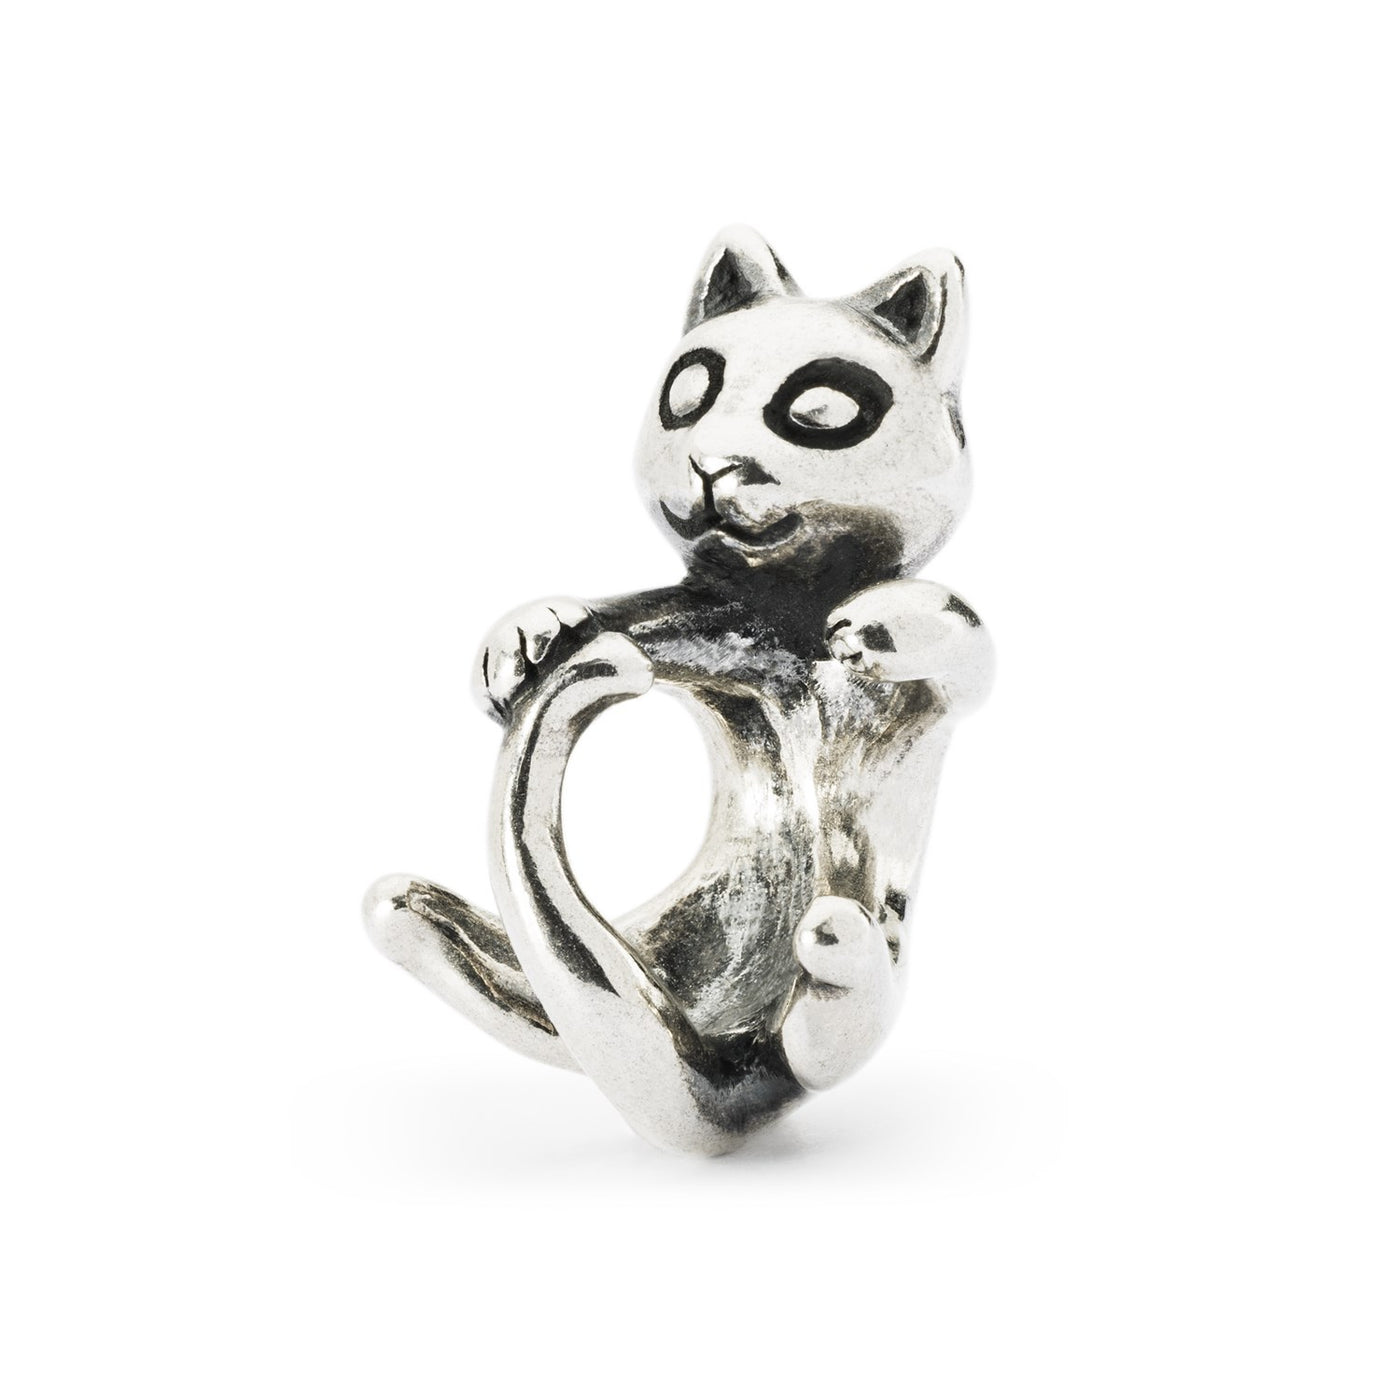 Trollbeads Cheerful Cat Bead: a delightful silver bead in the shape of a smiling cat, adding a touch of playfulness to your bracelet or necklace.